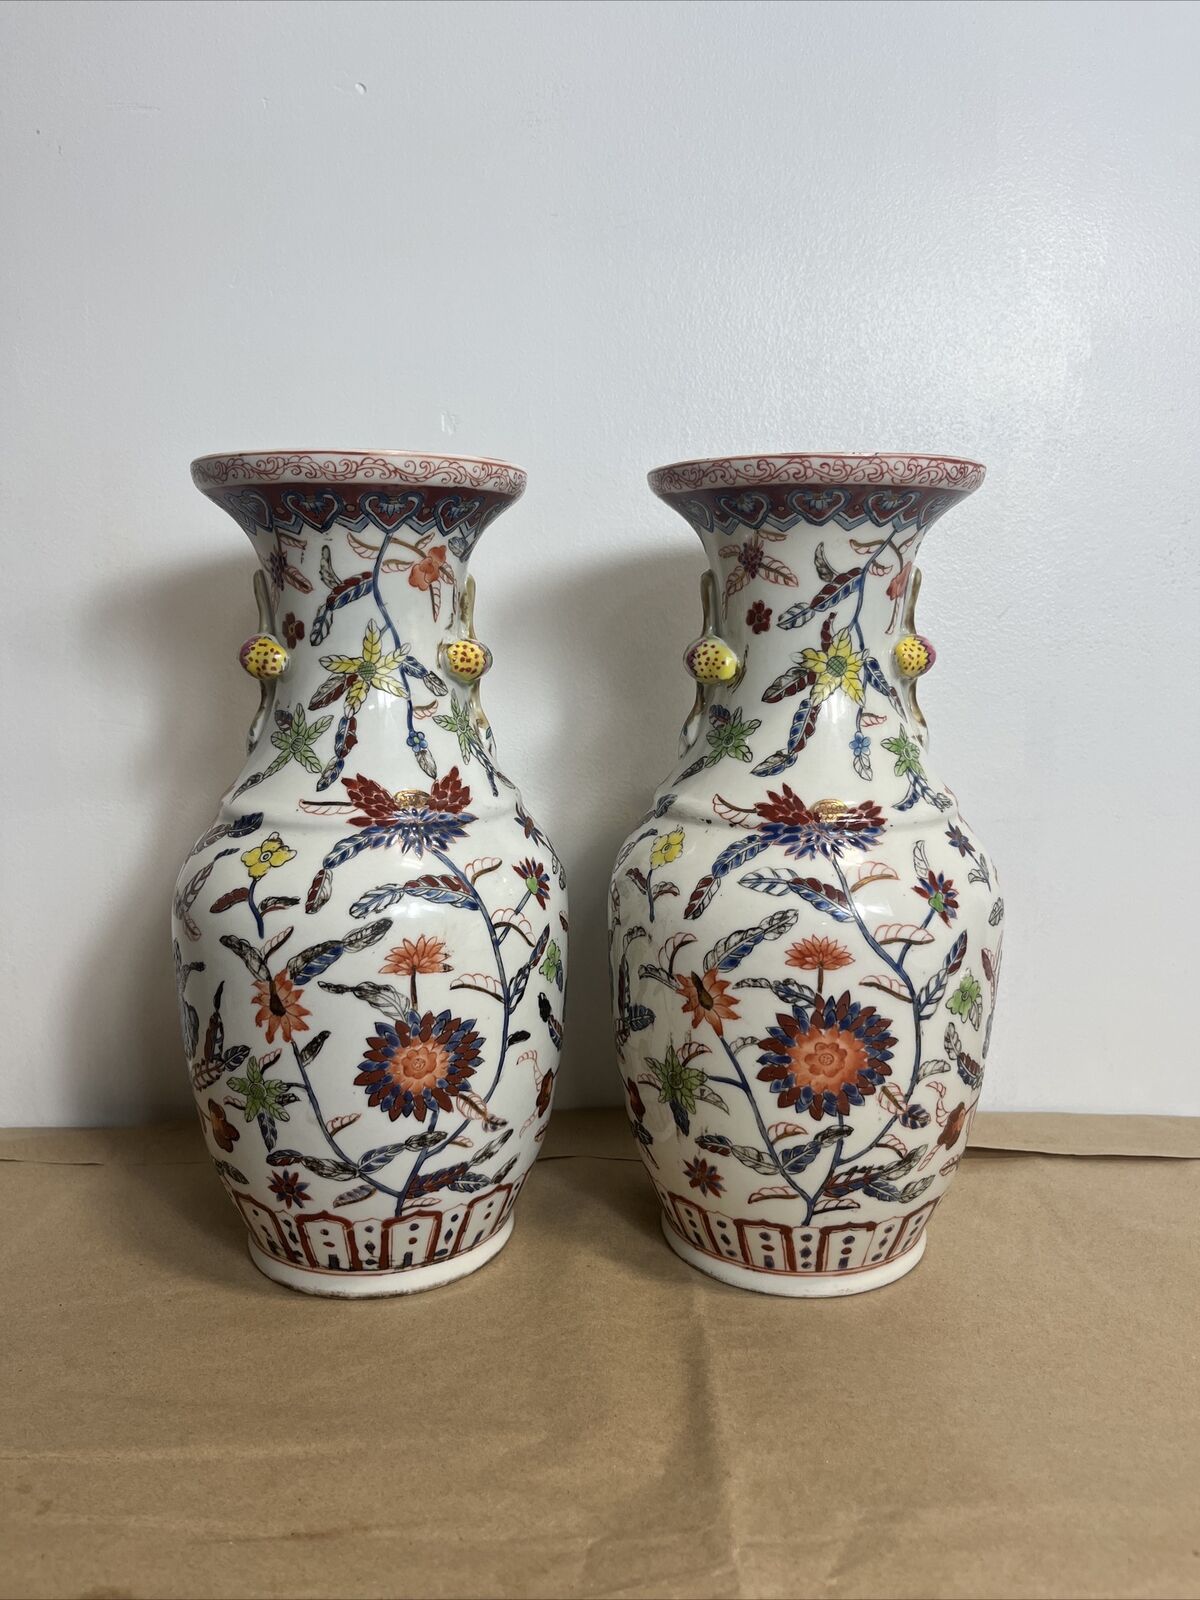 Pair of Antique China Porcelain Vase Hand Painted Chinese Art Vintage Decorative